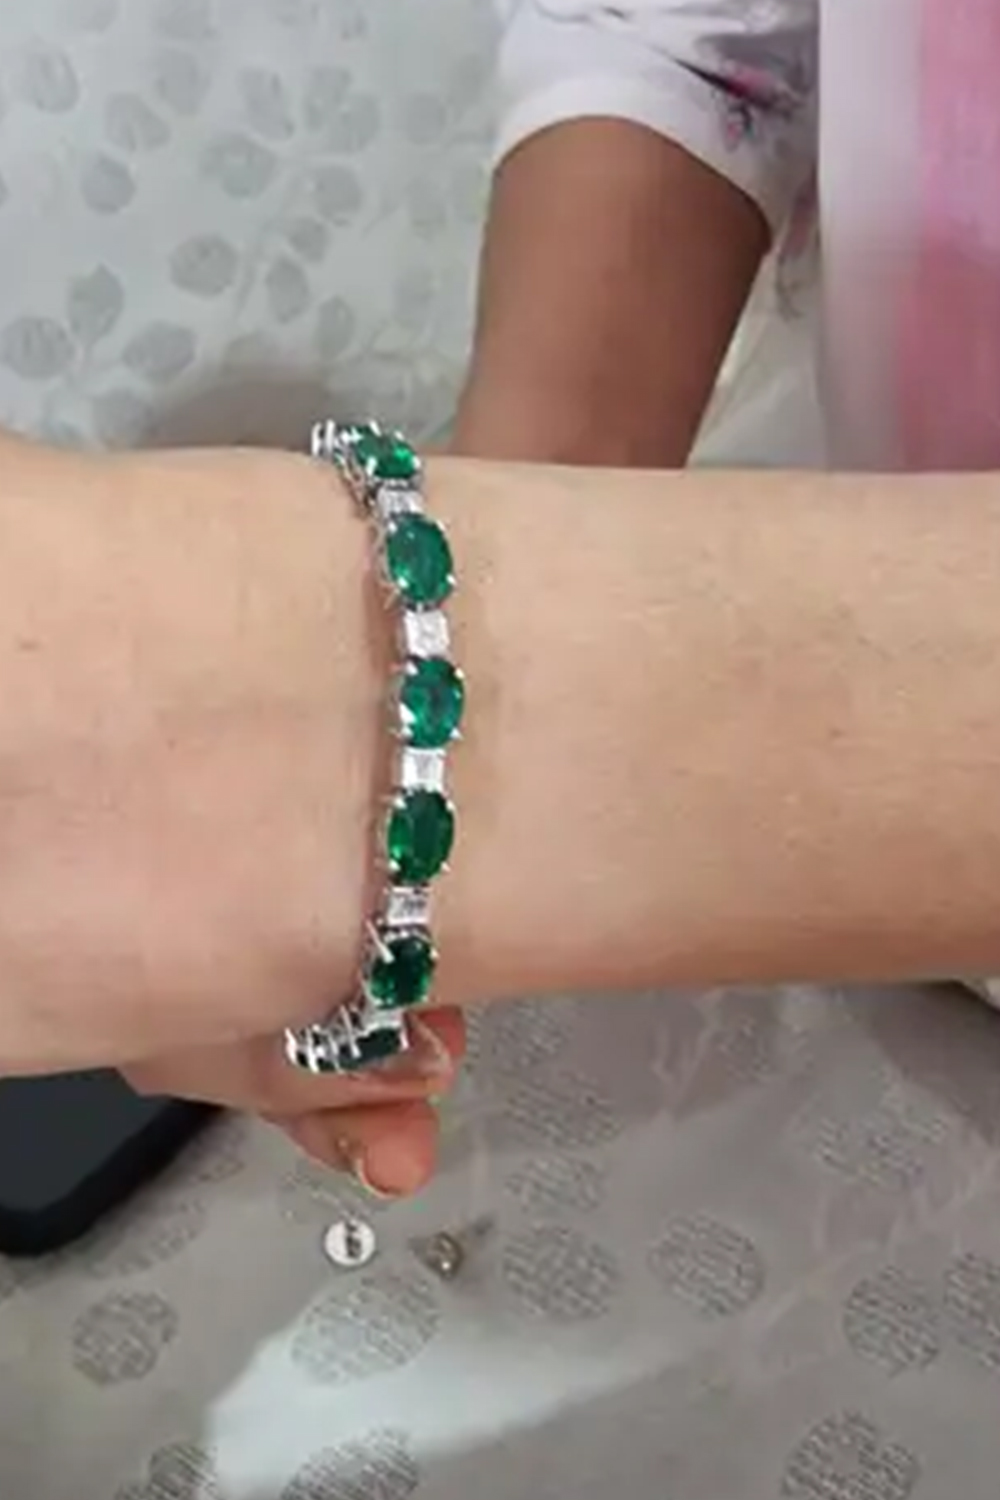 Zambian Emerald 13.06cts Tennis Bracelet with Diamonds 0.74cts and 14k Gold